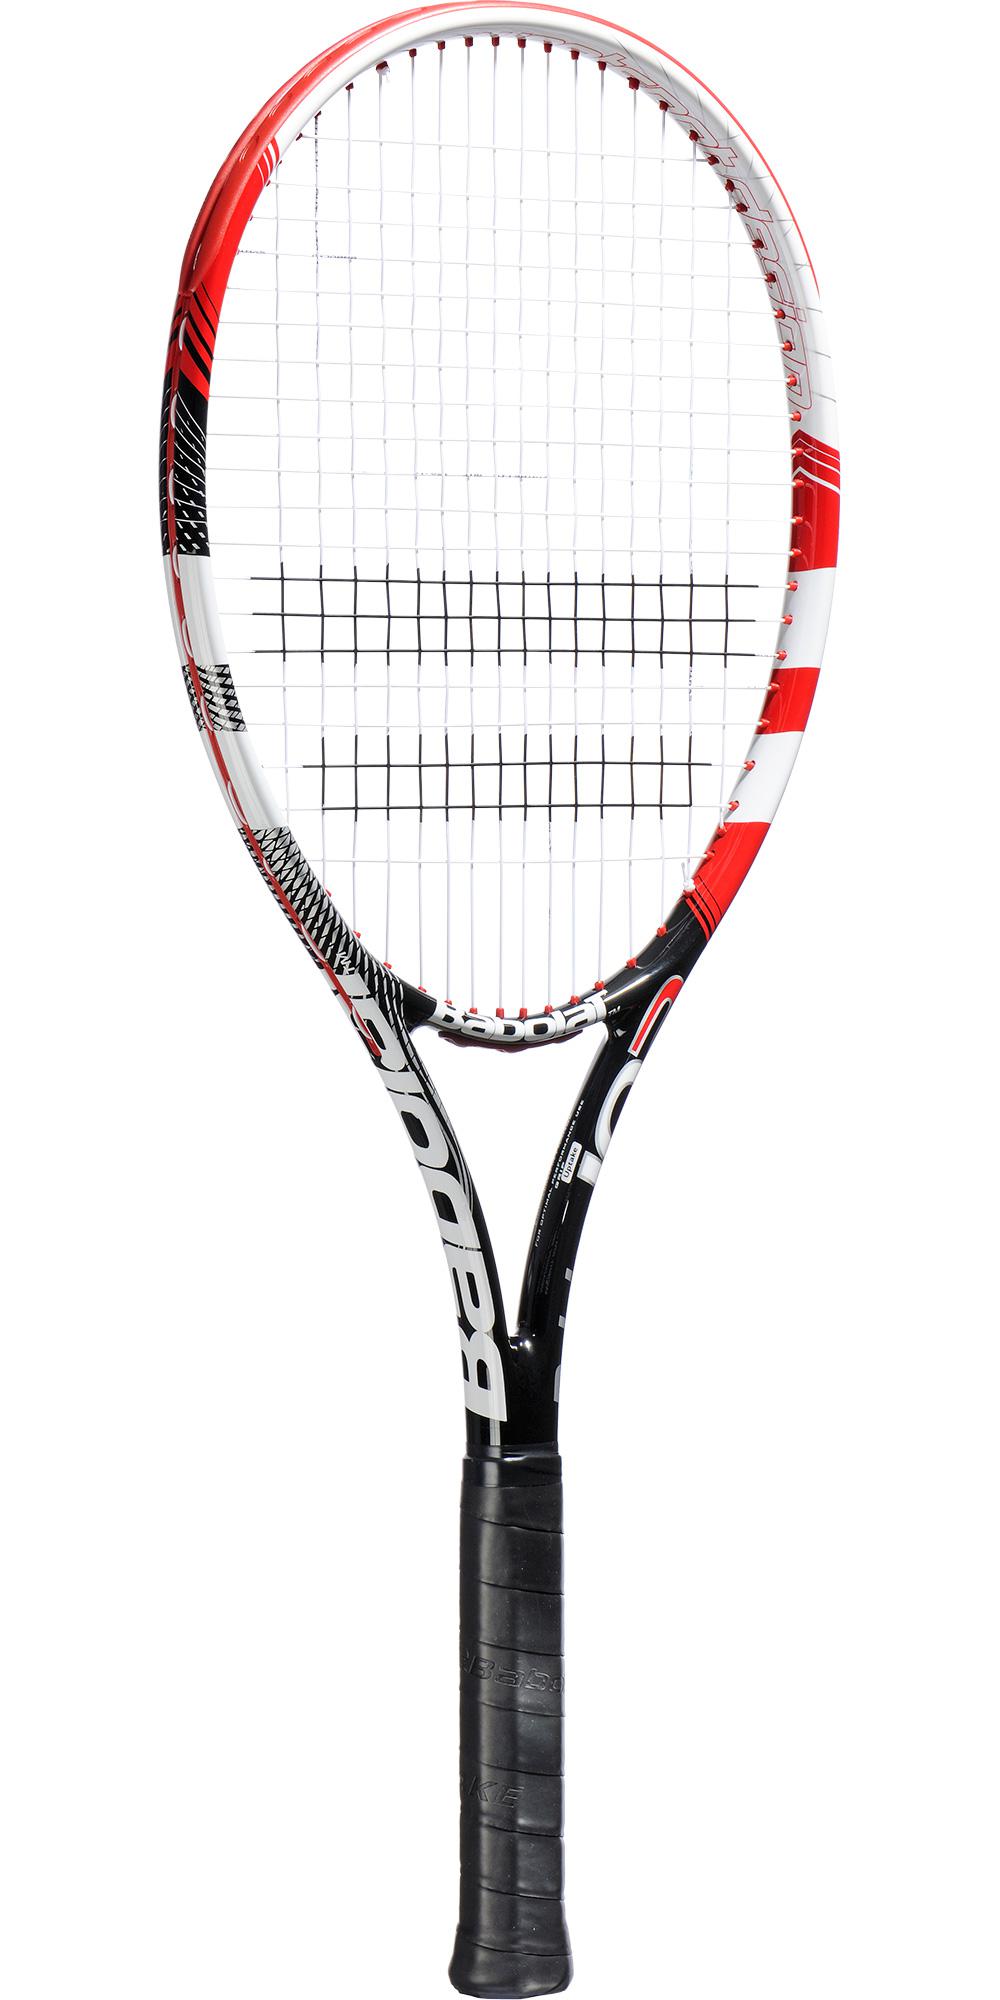 Babolat Pulsion Red Racket - Black/Red -